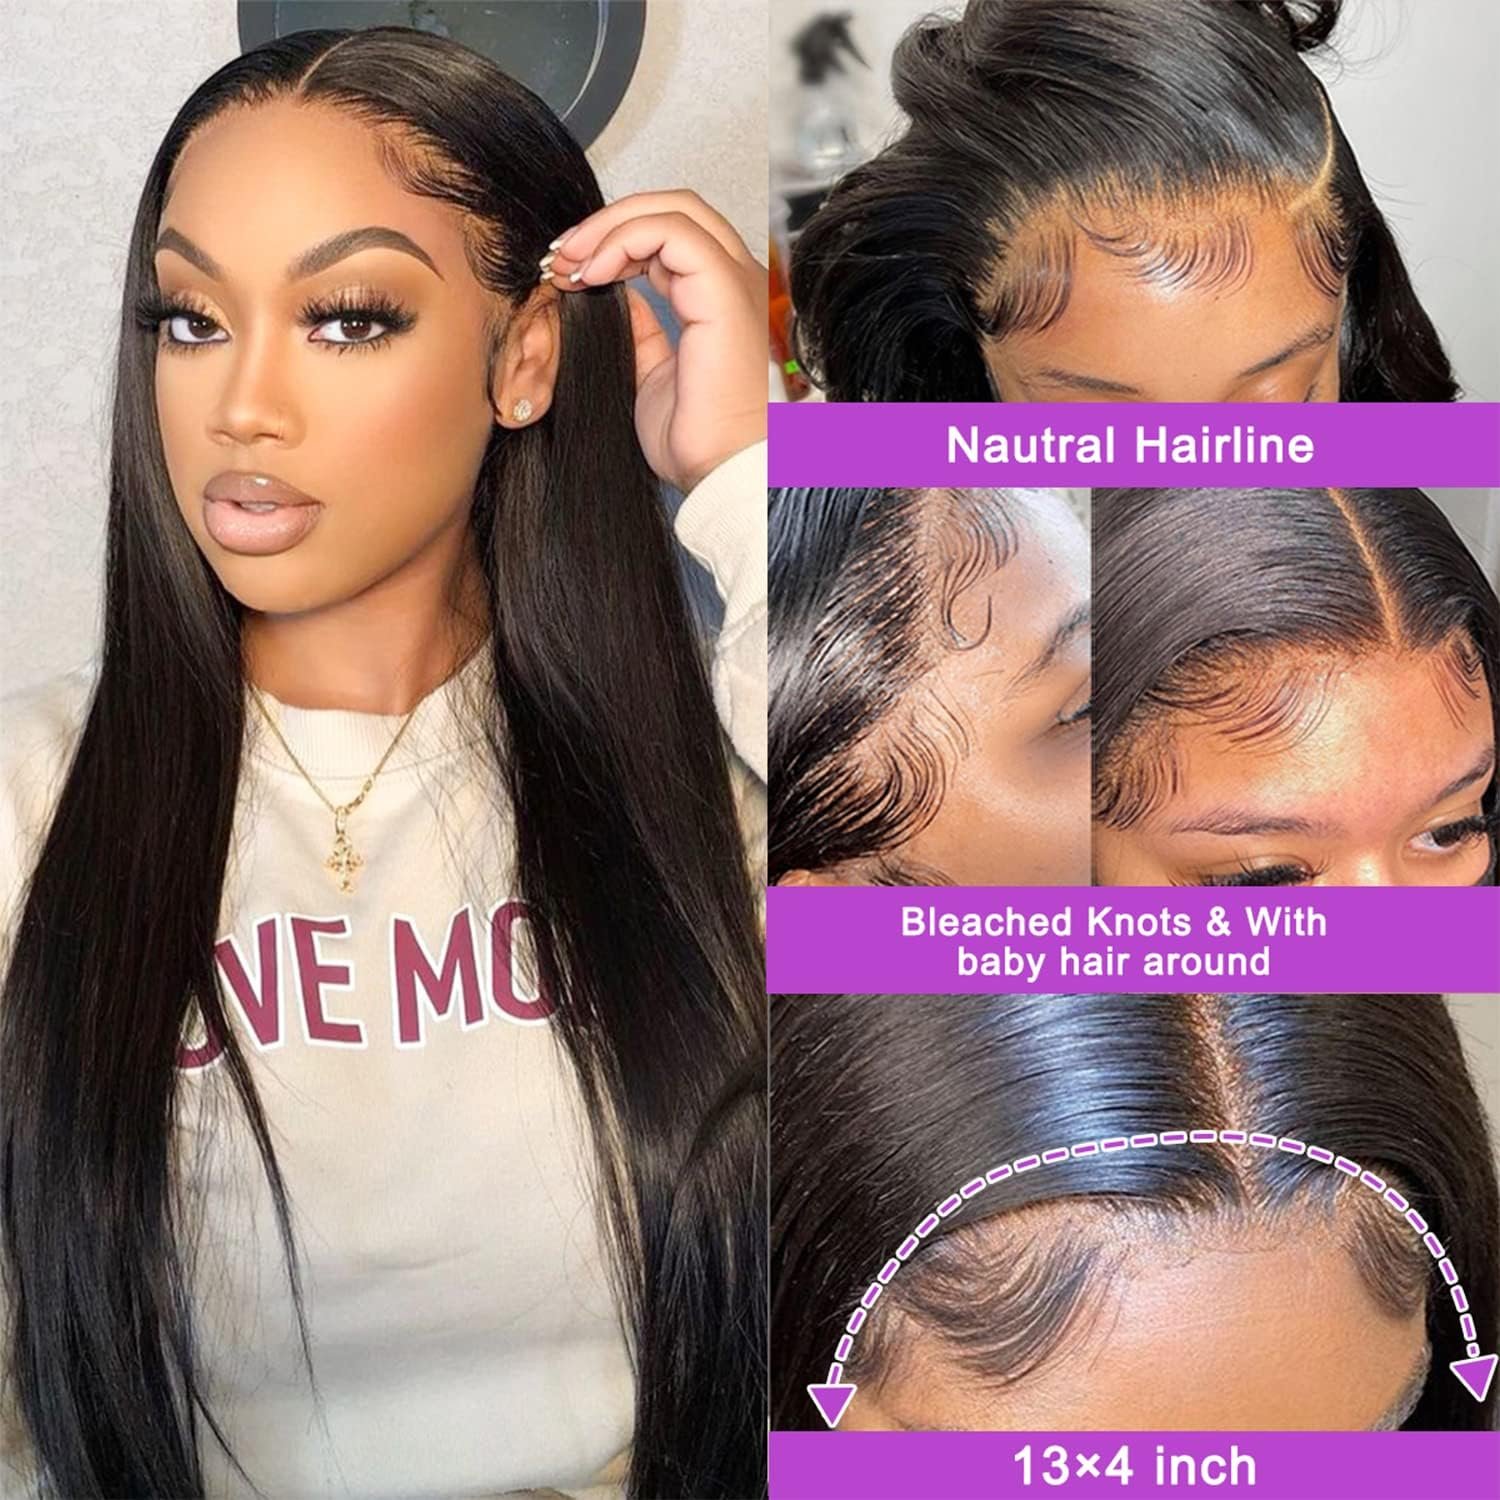 NVL Lace Front Wigs Review